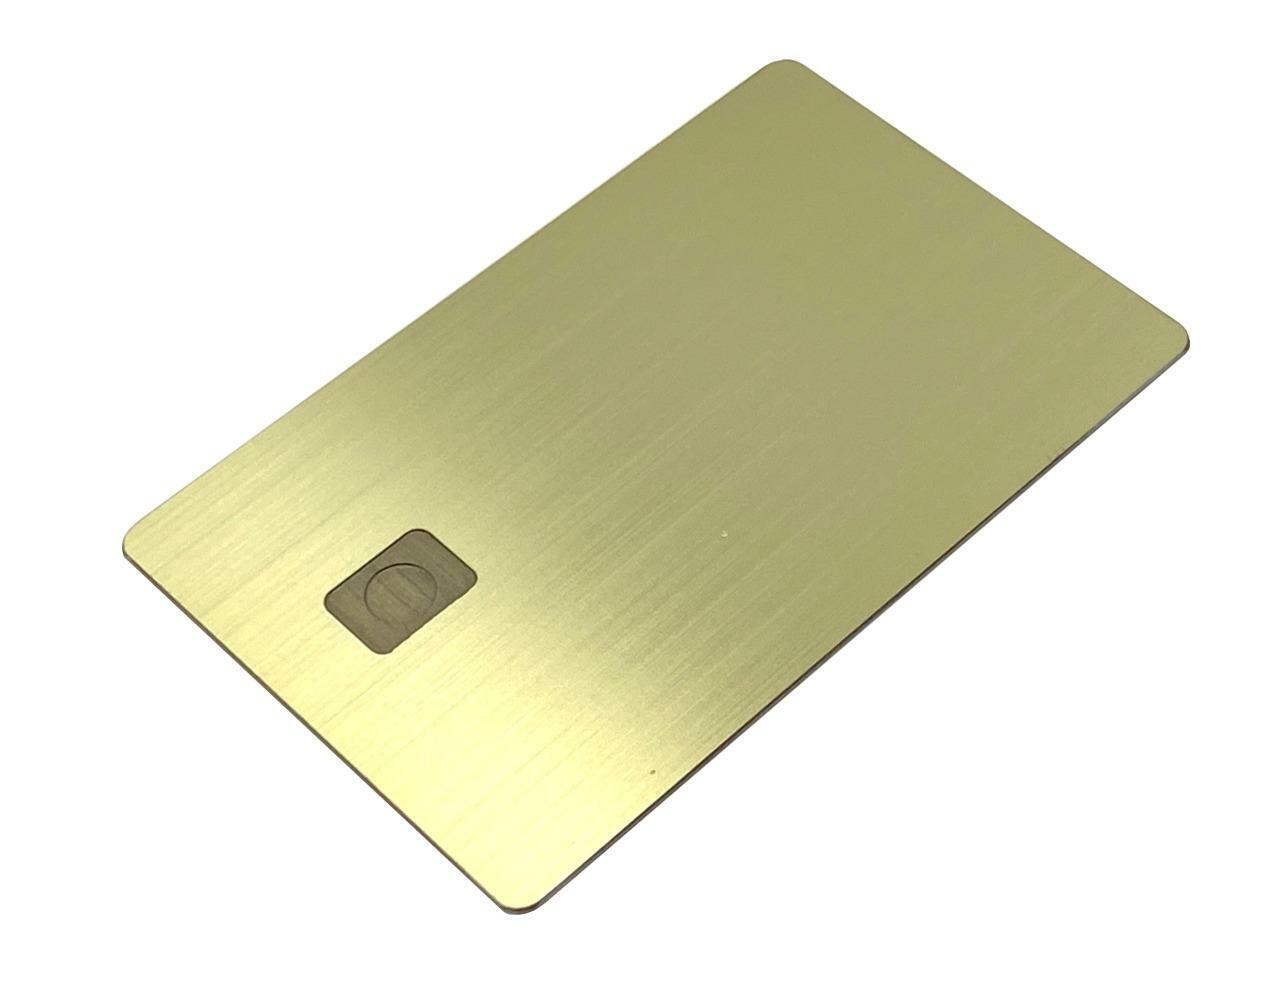 Heavy Metal Stainless Steel Credit Card Blank w/ Chip Slot & Mag Strip Gold